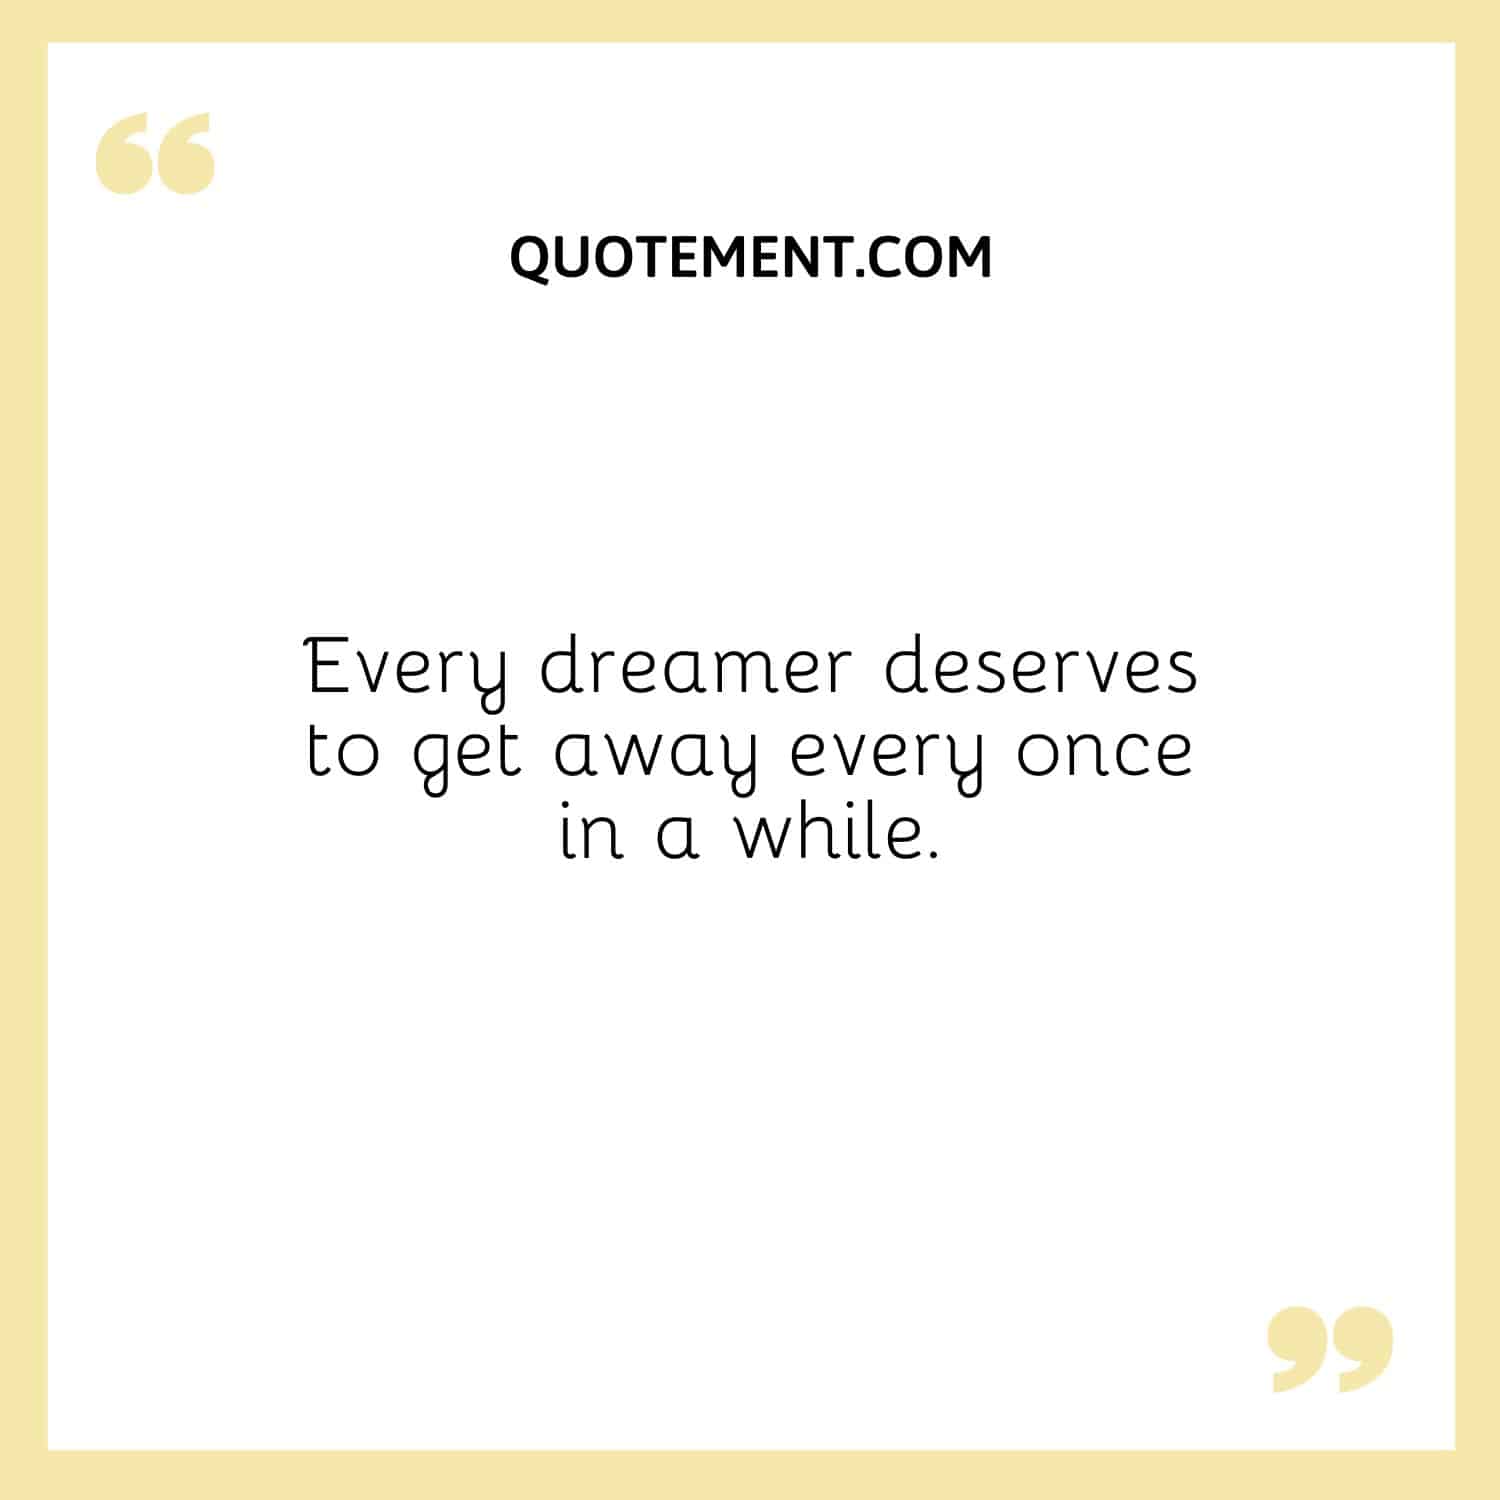 Every dreamer deserves to get away every once in a while.